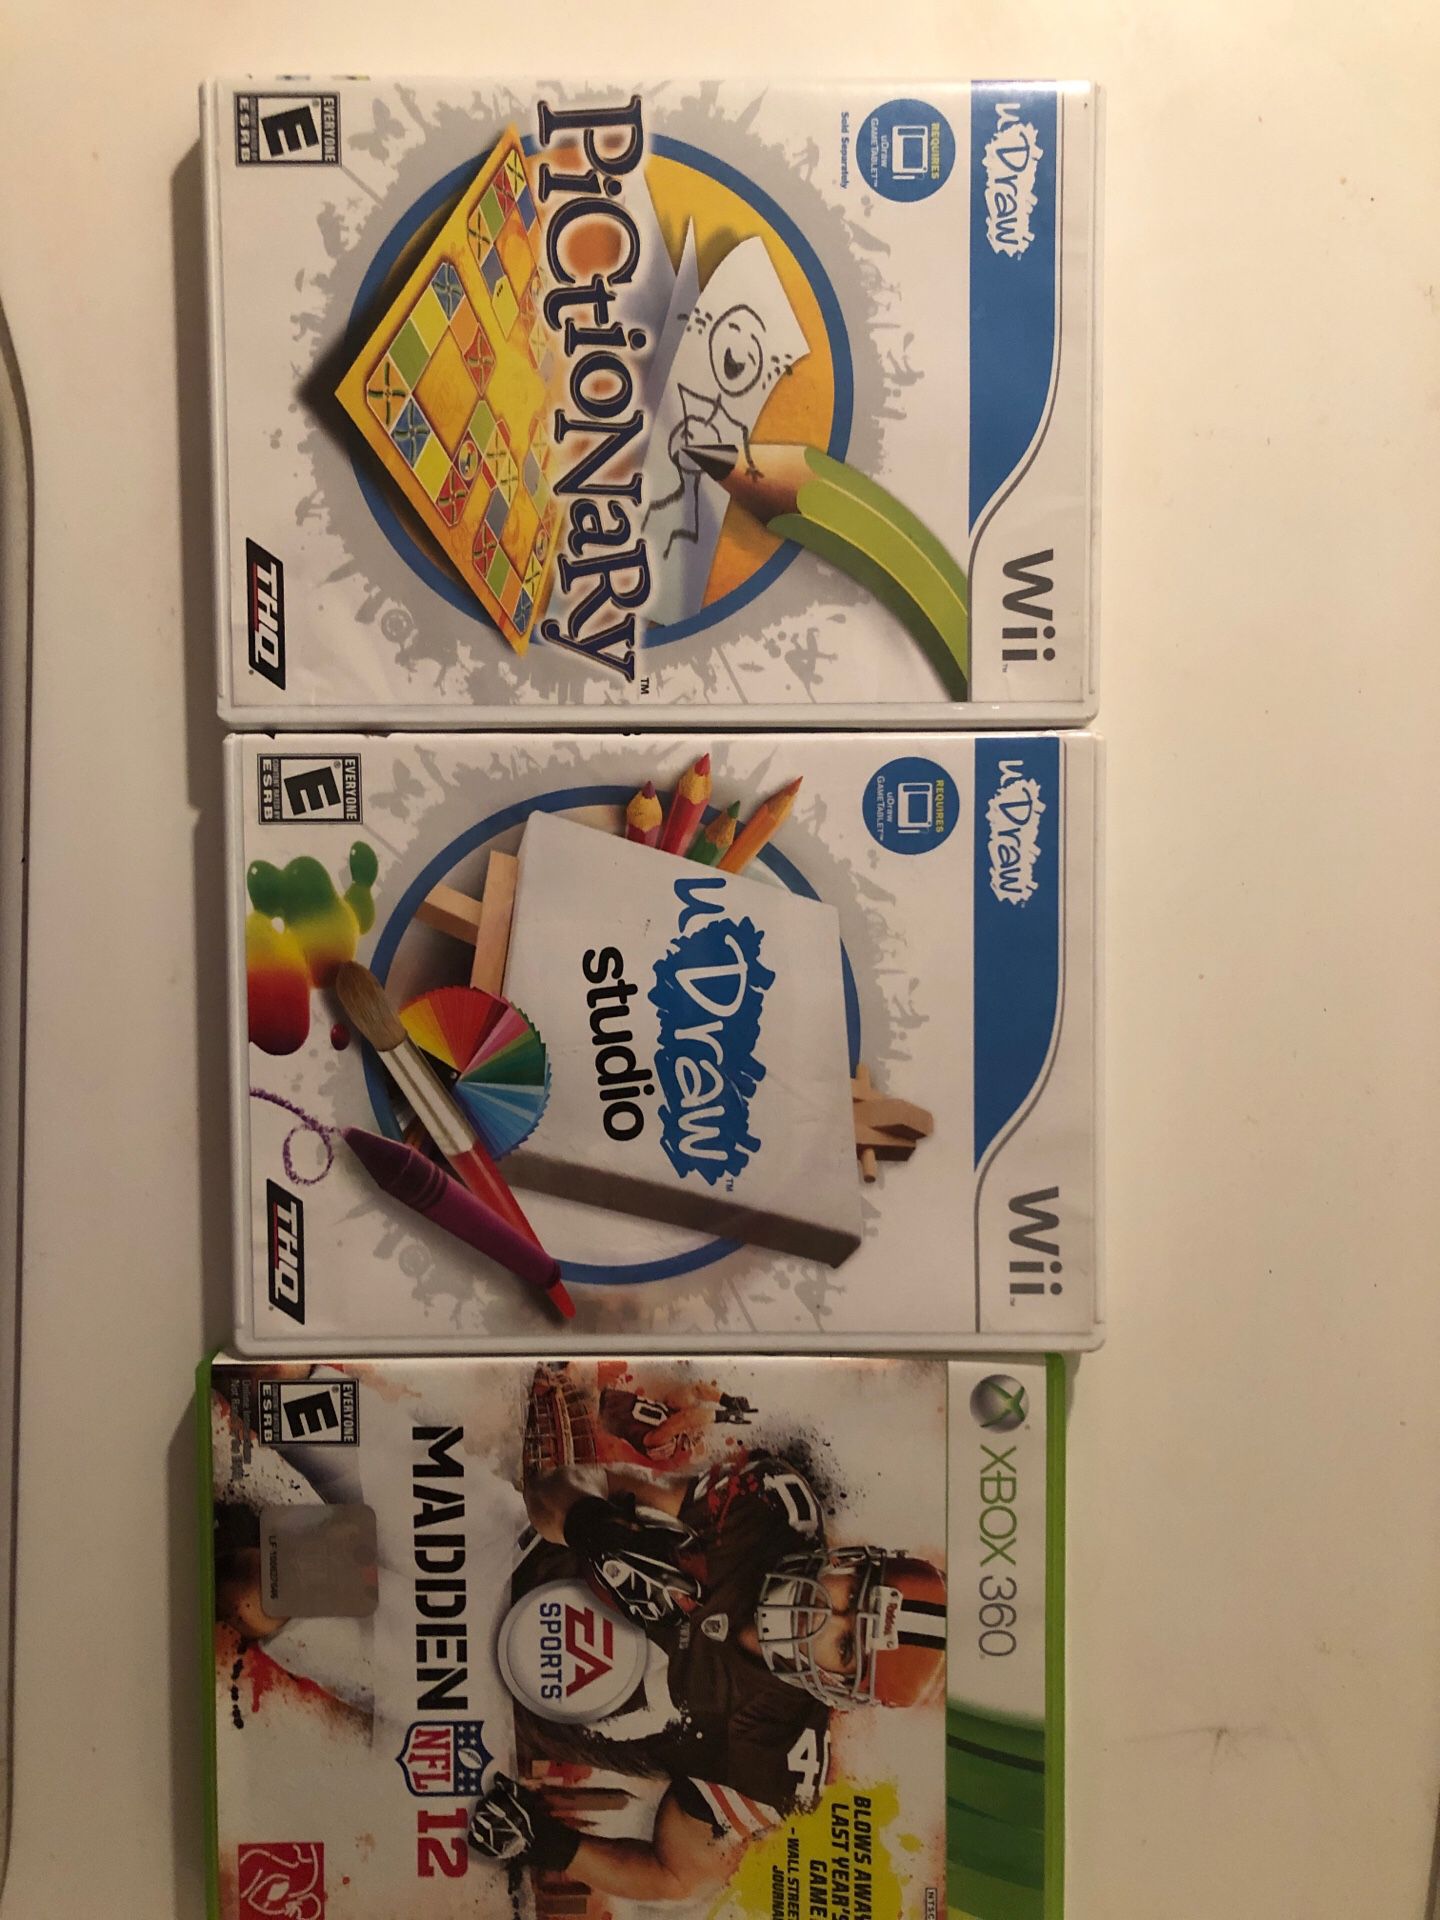 Three video games to Wii games one Xbox 360 video game mint condition no scratches